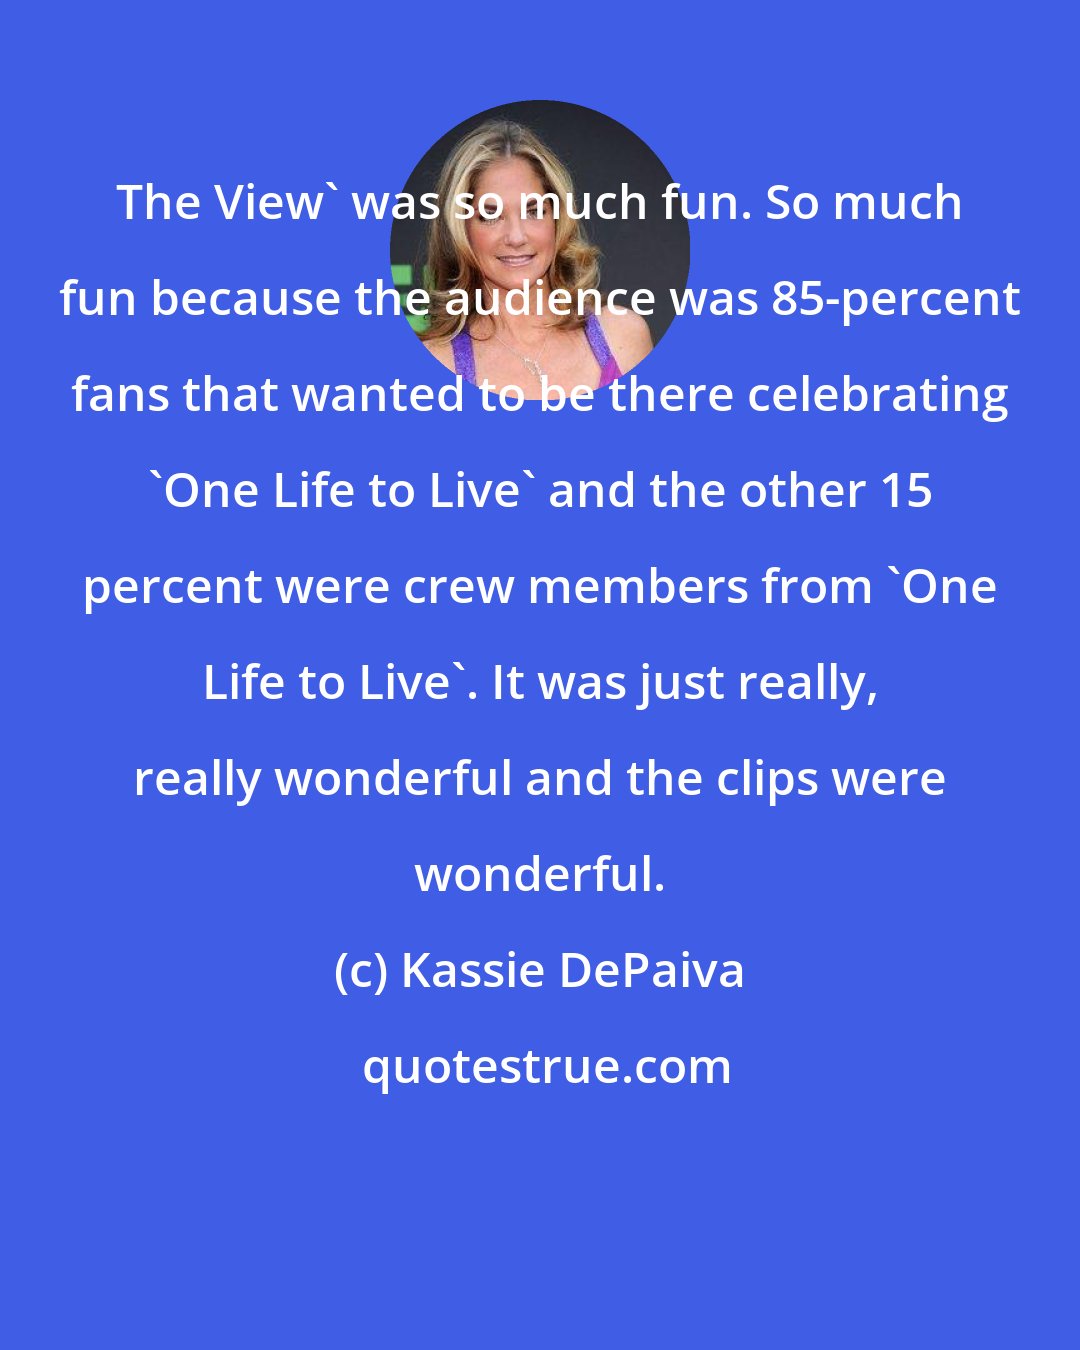 Kassie DePaiva: The View' was so much fun. So much fun because the audience was 85-percent fans that wanted to be there celebrating 'One Life to Live' and the other 15 percent were crew members from 'One Life to Live'. It was just really, really wonderful and the clips were wonderful.